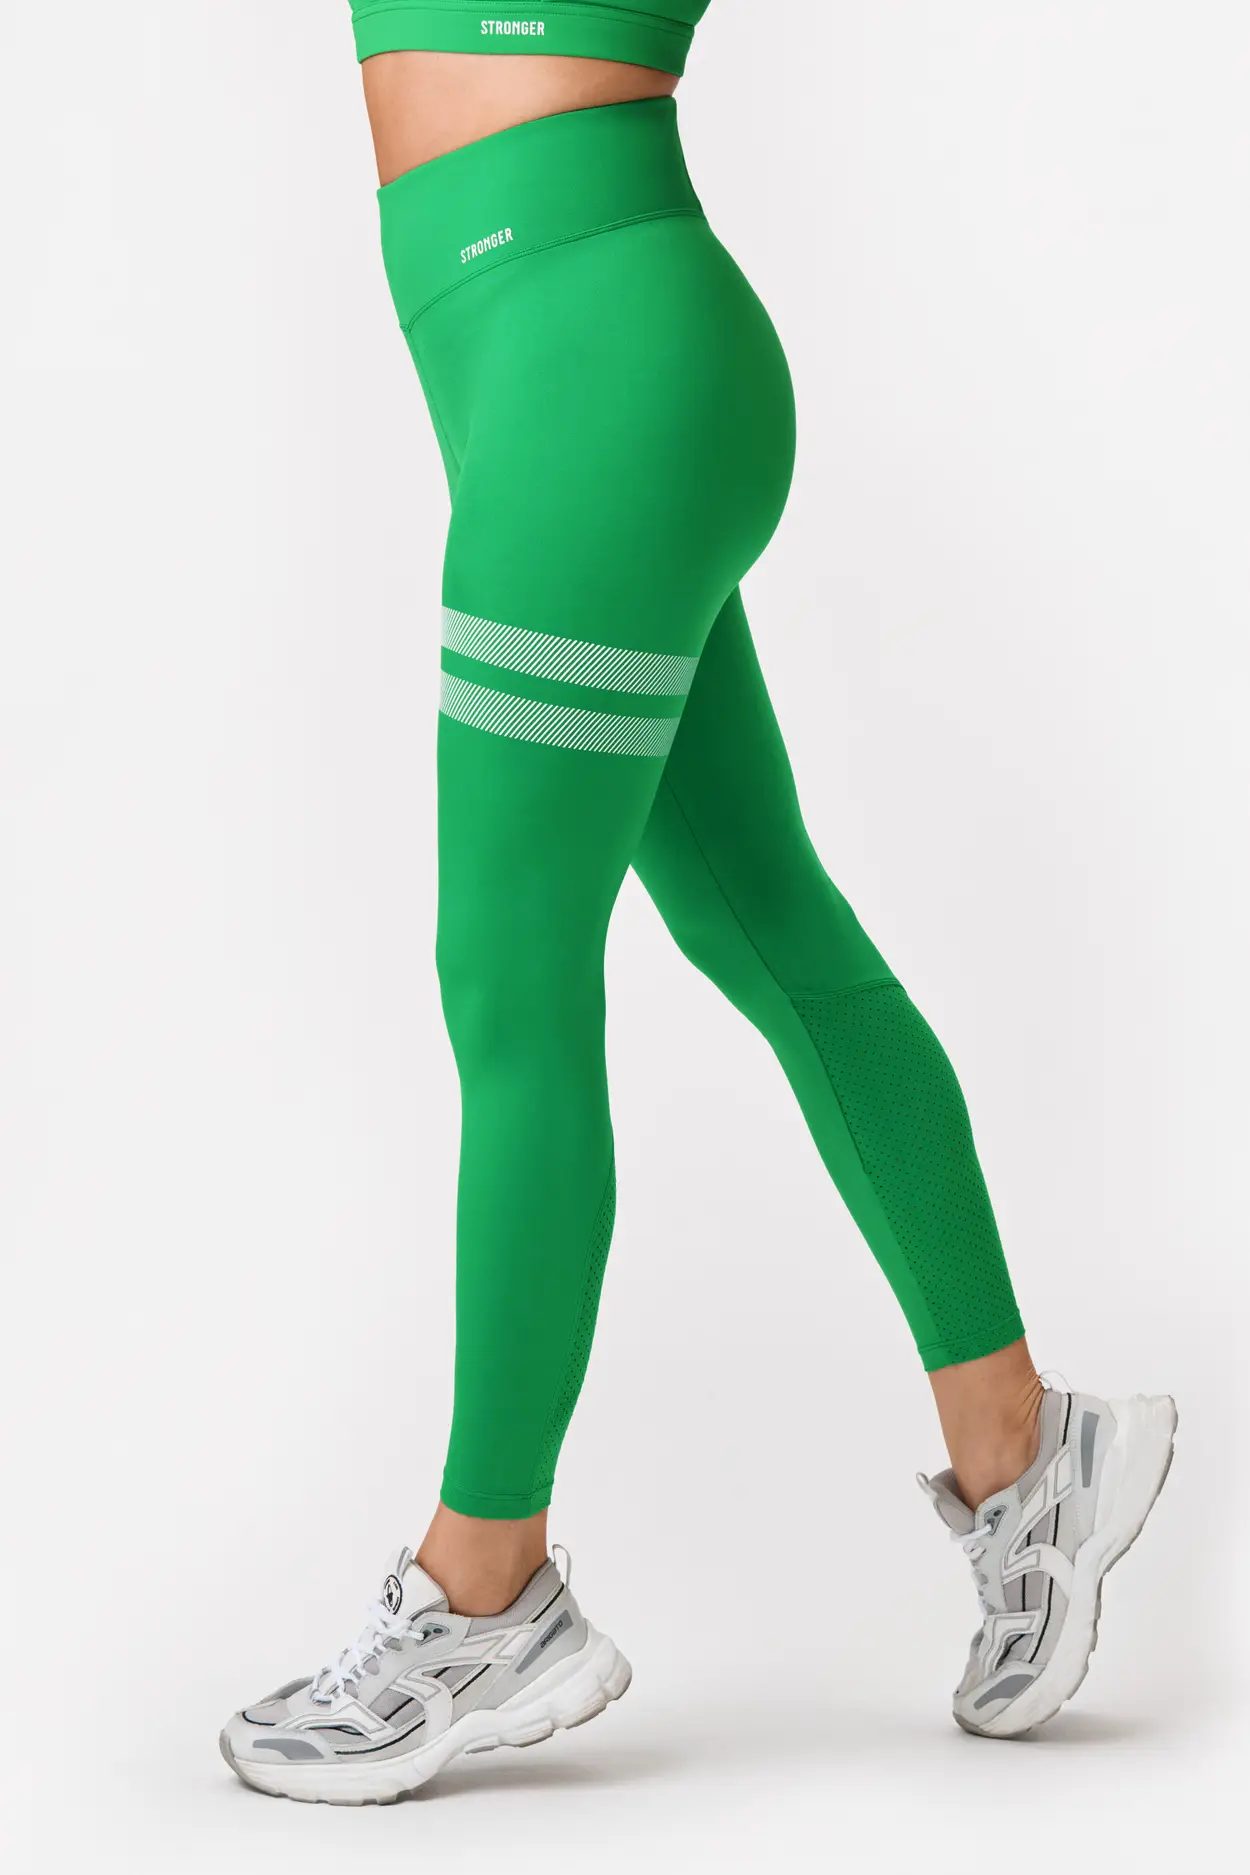 Calia high rise 7/8 legging mint green compression waist size large - $35 -  From Britney